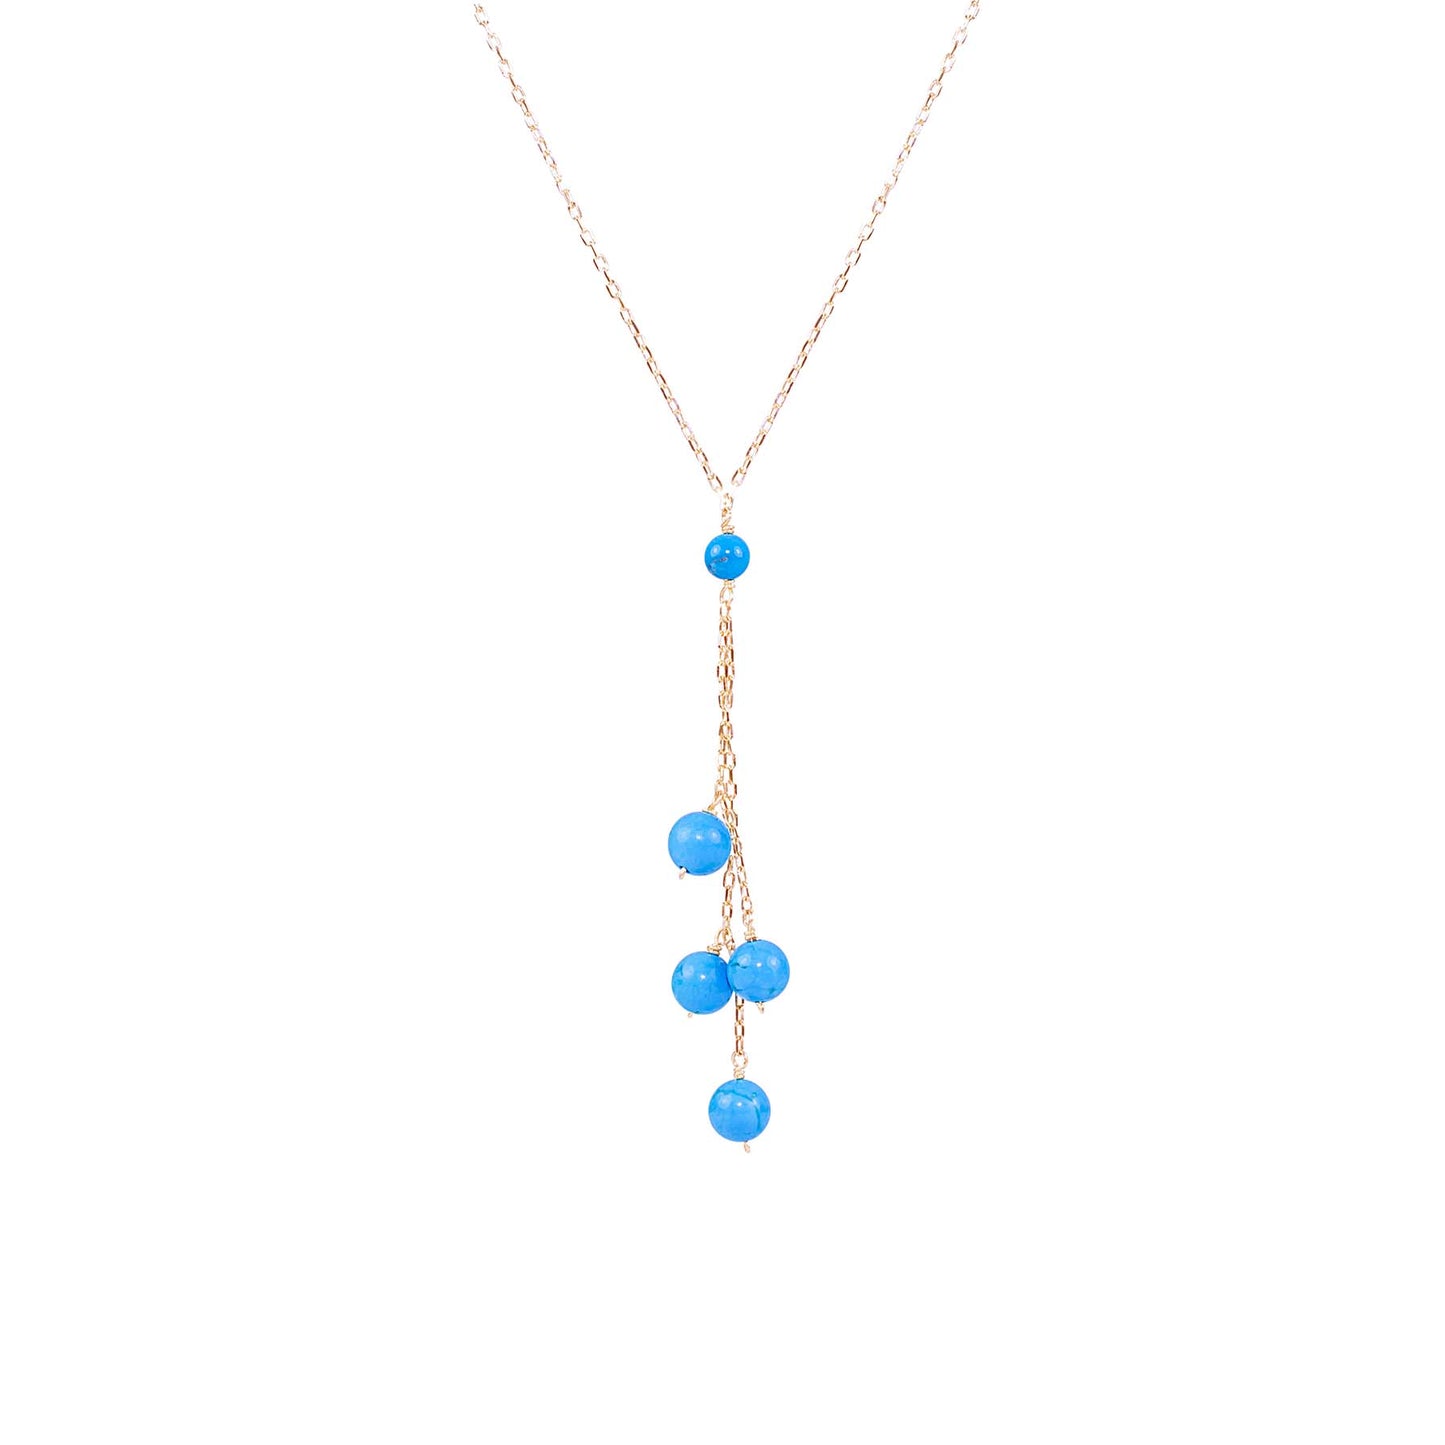 14k Turquoise Necklace 17"